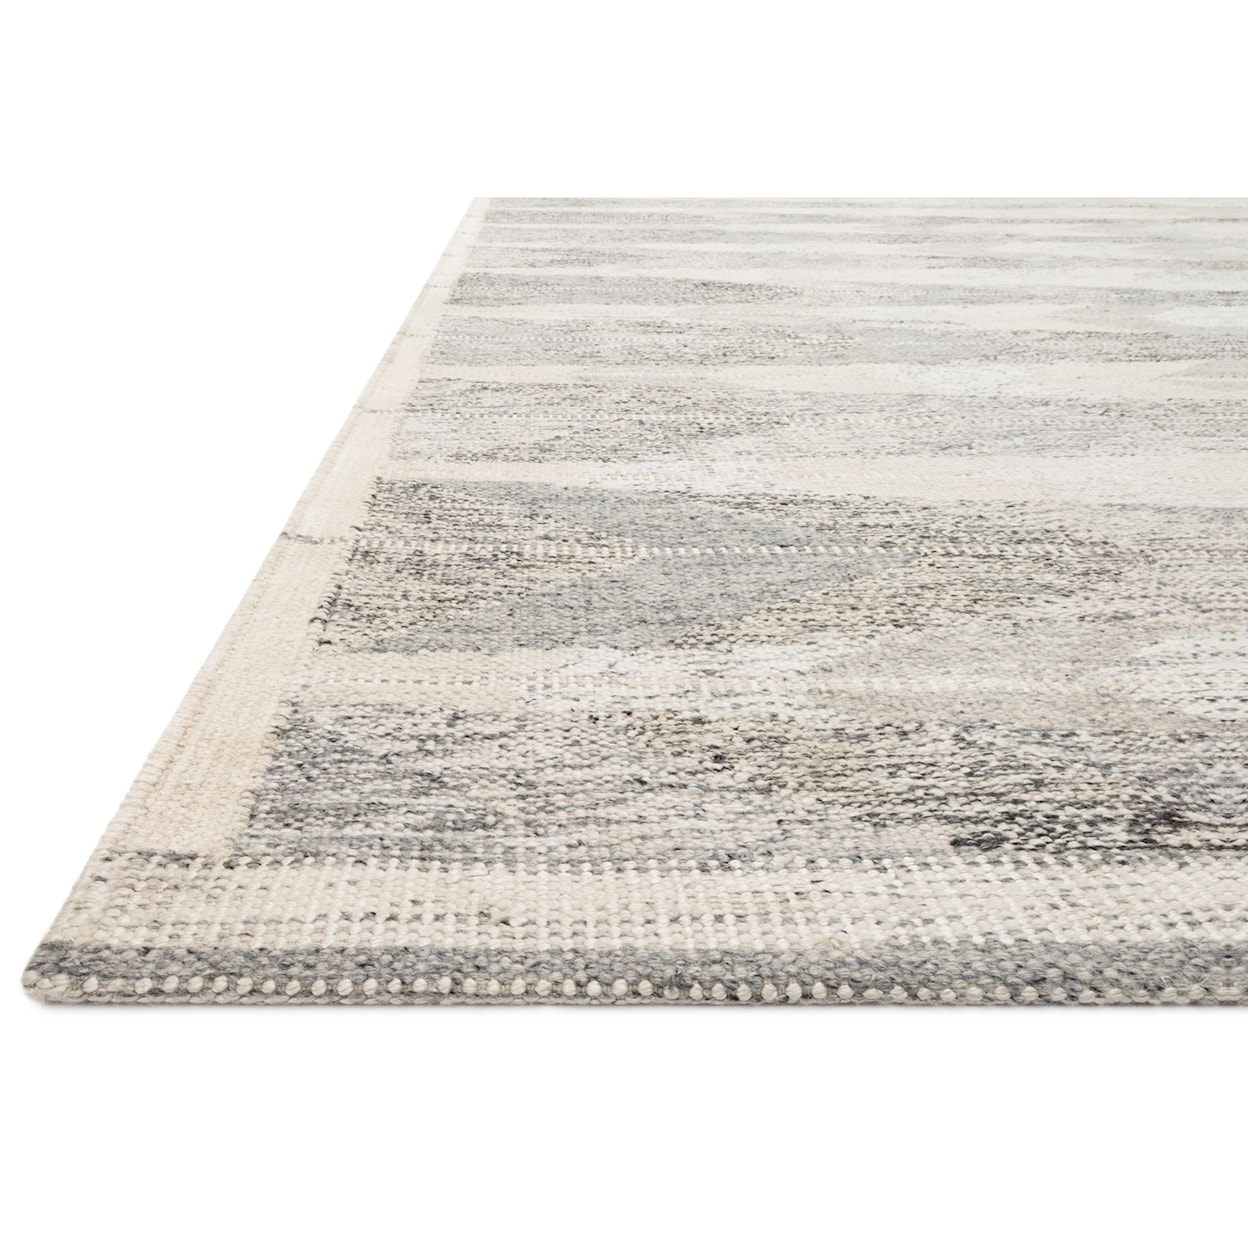 Reeds Rugs Evelina 7'9" x 9'9" Pewter / Silver Rug